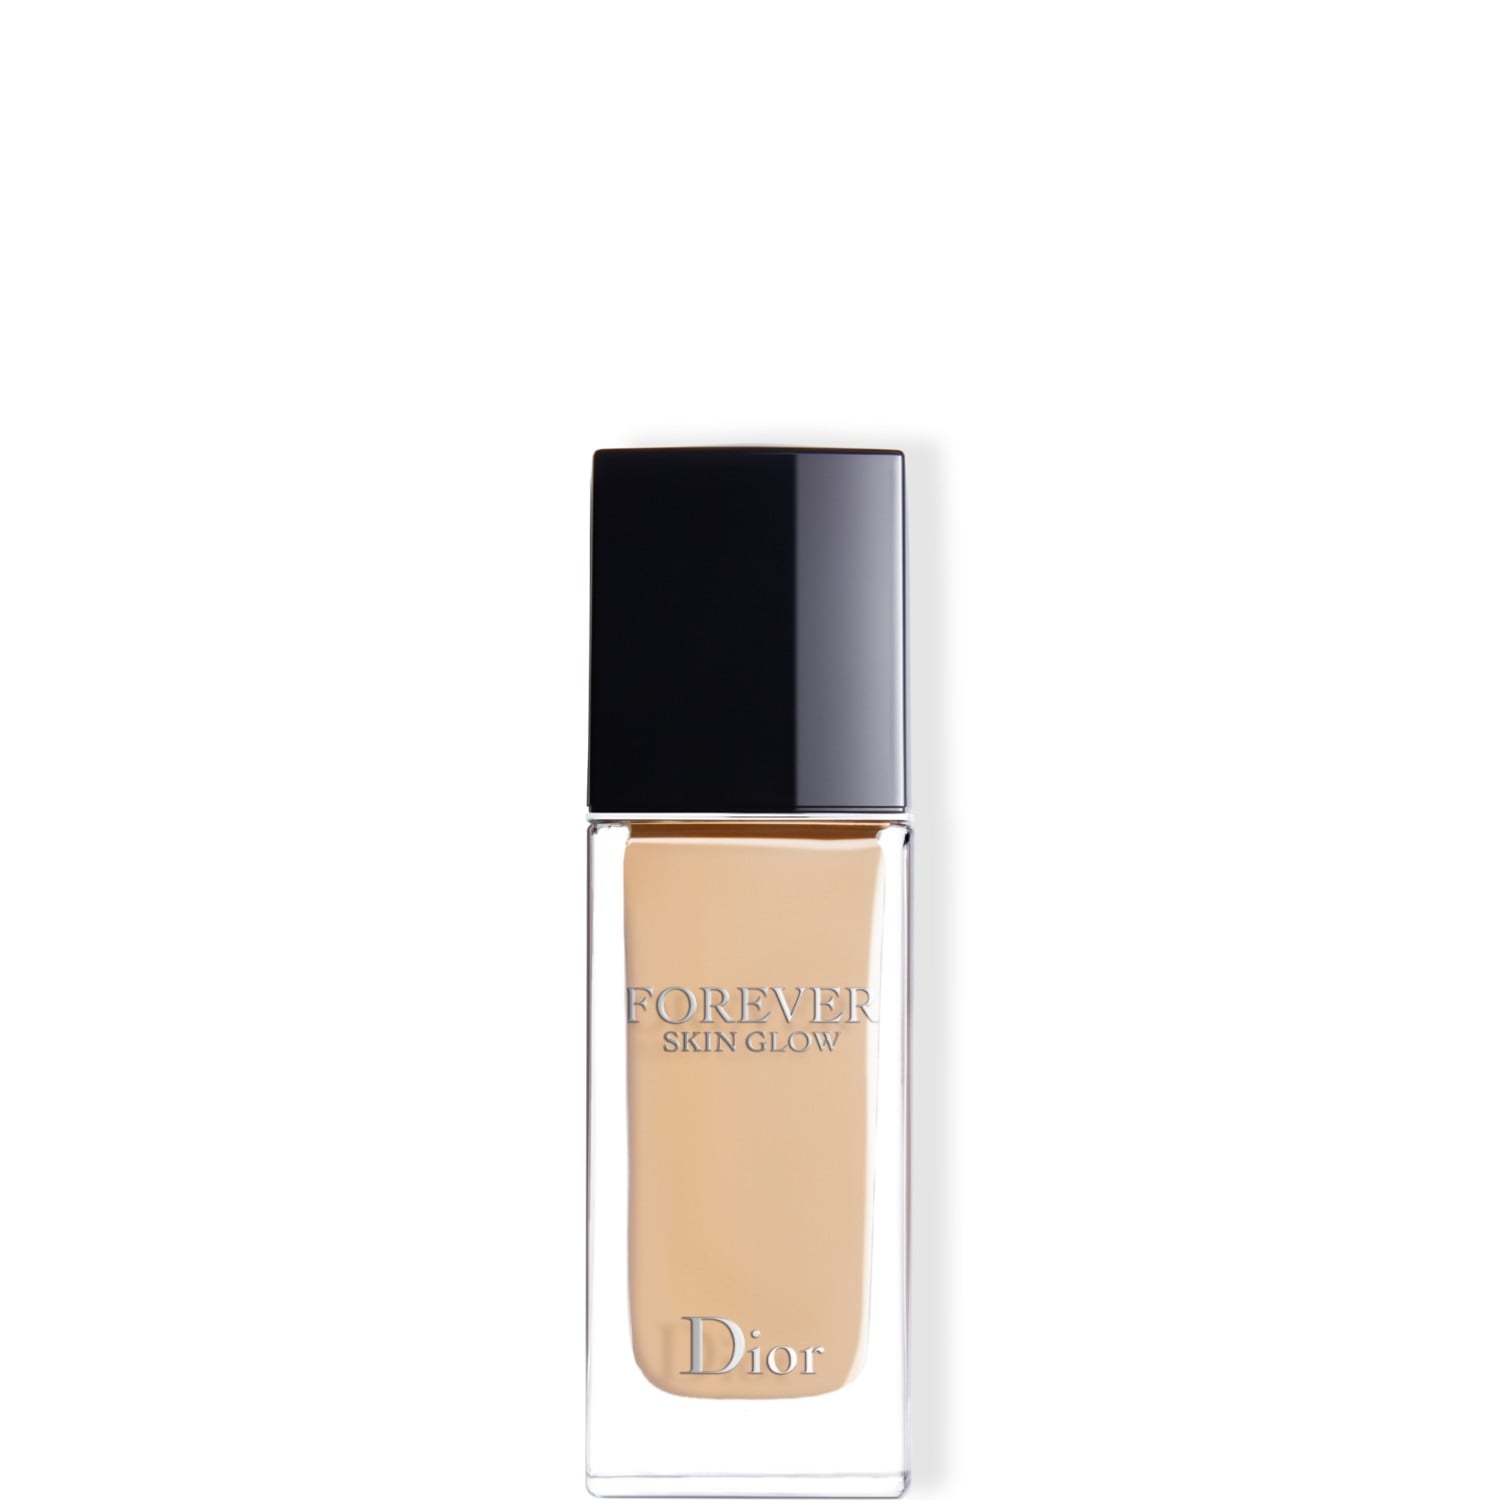 Dior Forever Skin Glow Foundation, No. 2CR - Cool Rosy